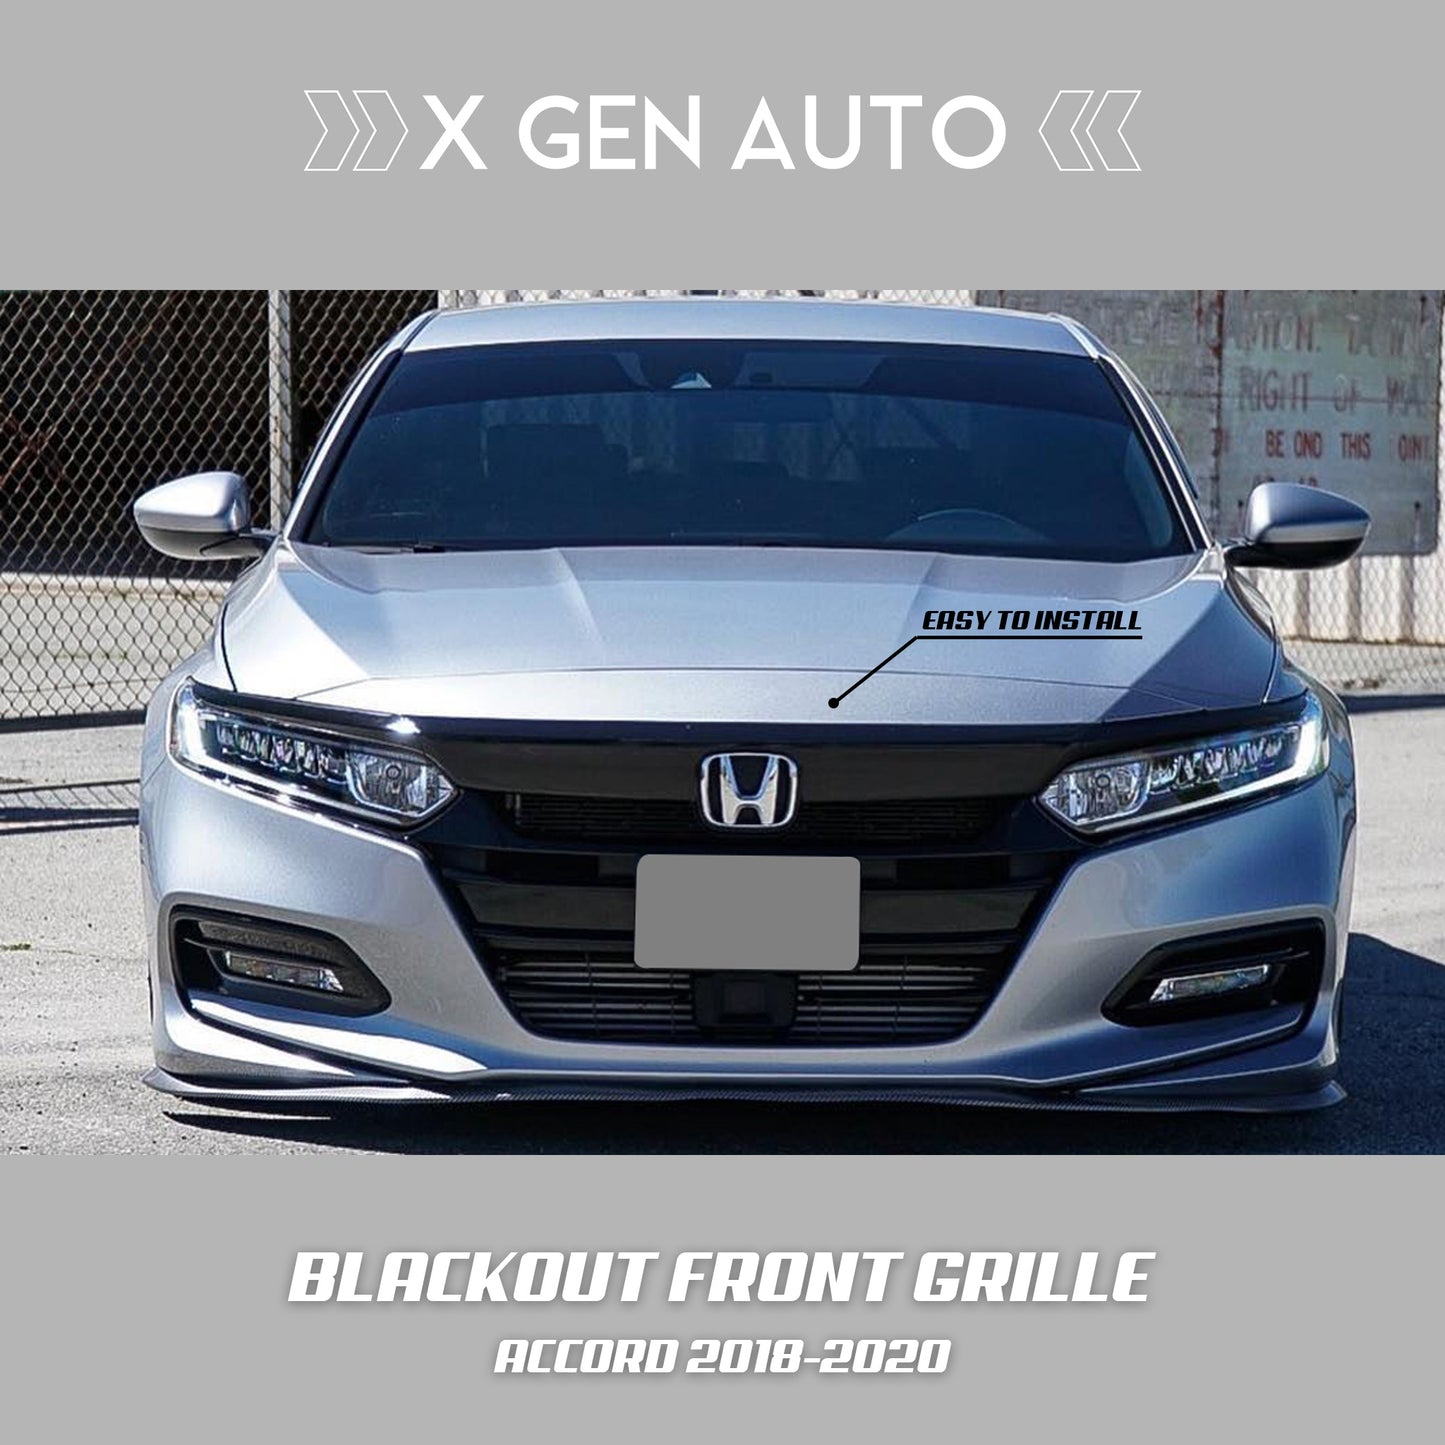 [ACCORD 2018-2020] BLACKOUT FRONT GRILLE KIT